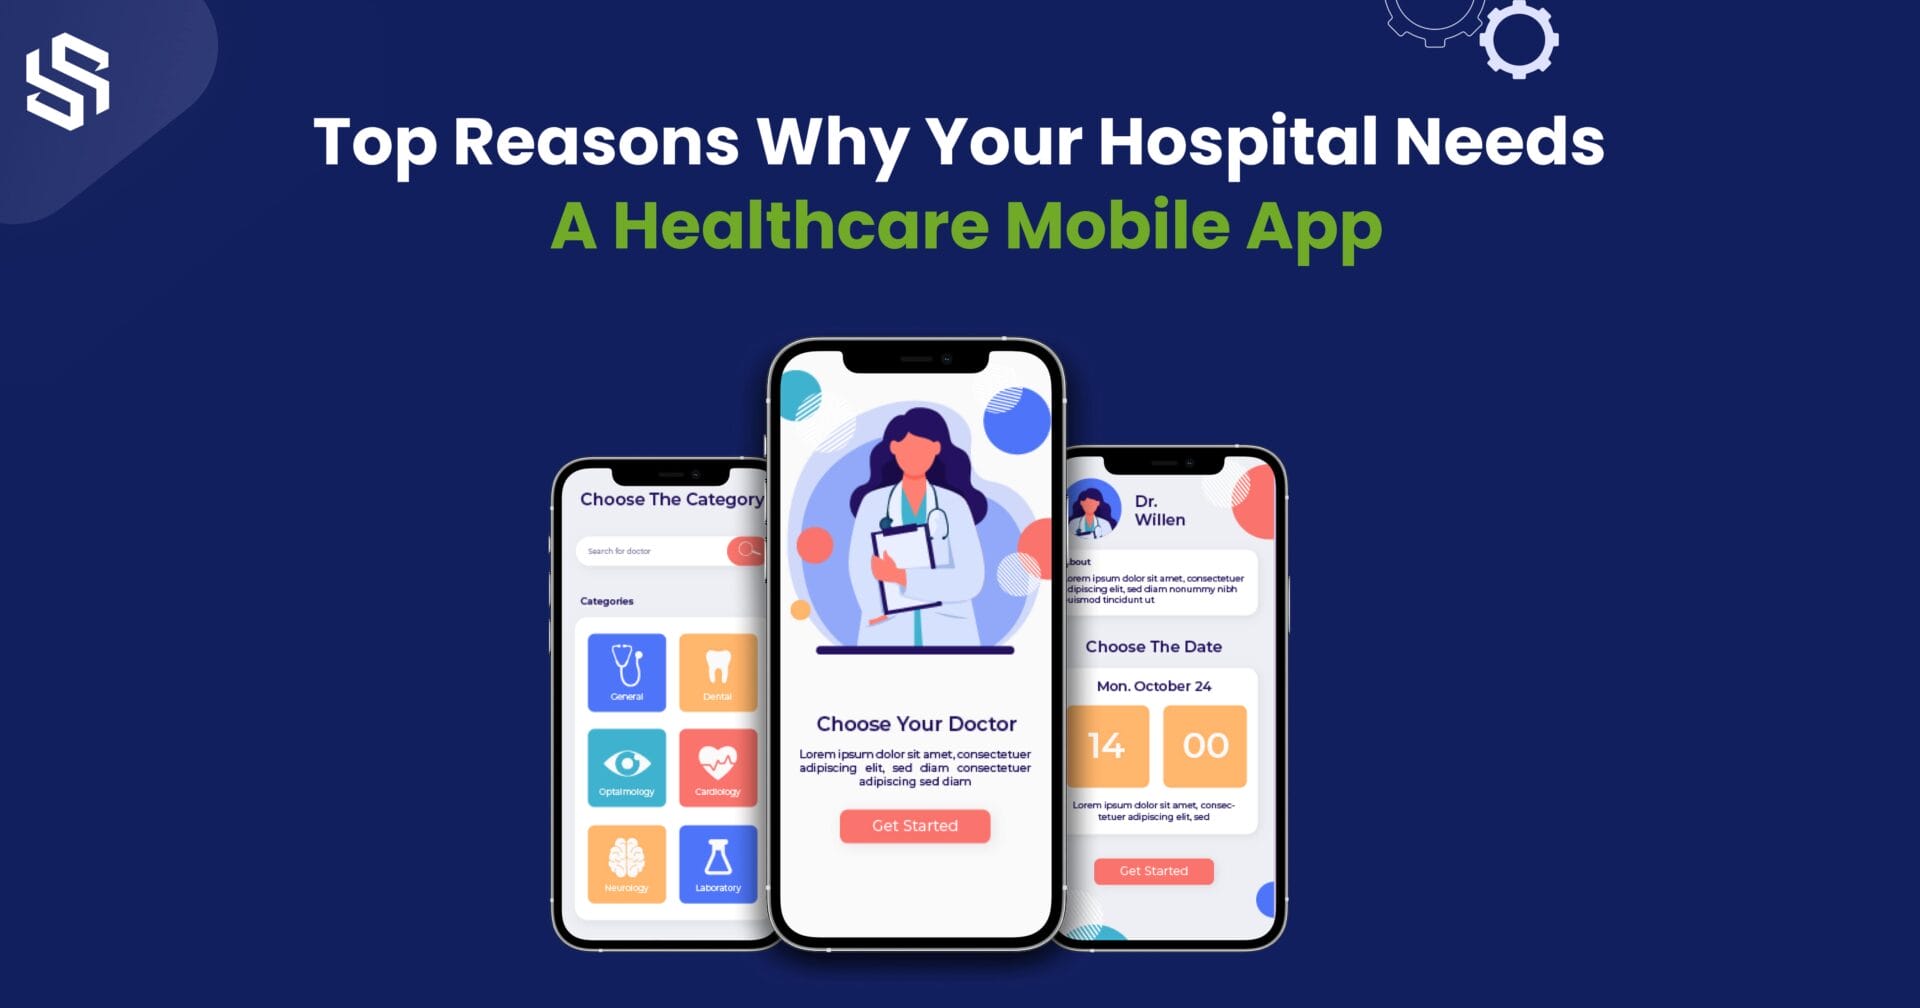 Top Reasons Why Your Hospital Needs A Healthcare Mobile App